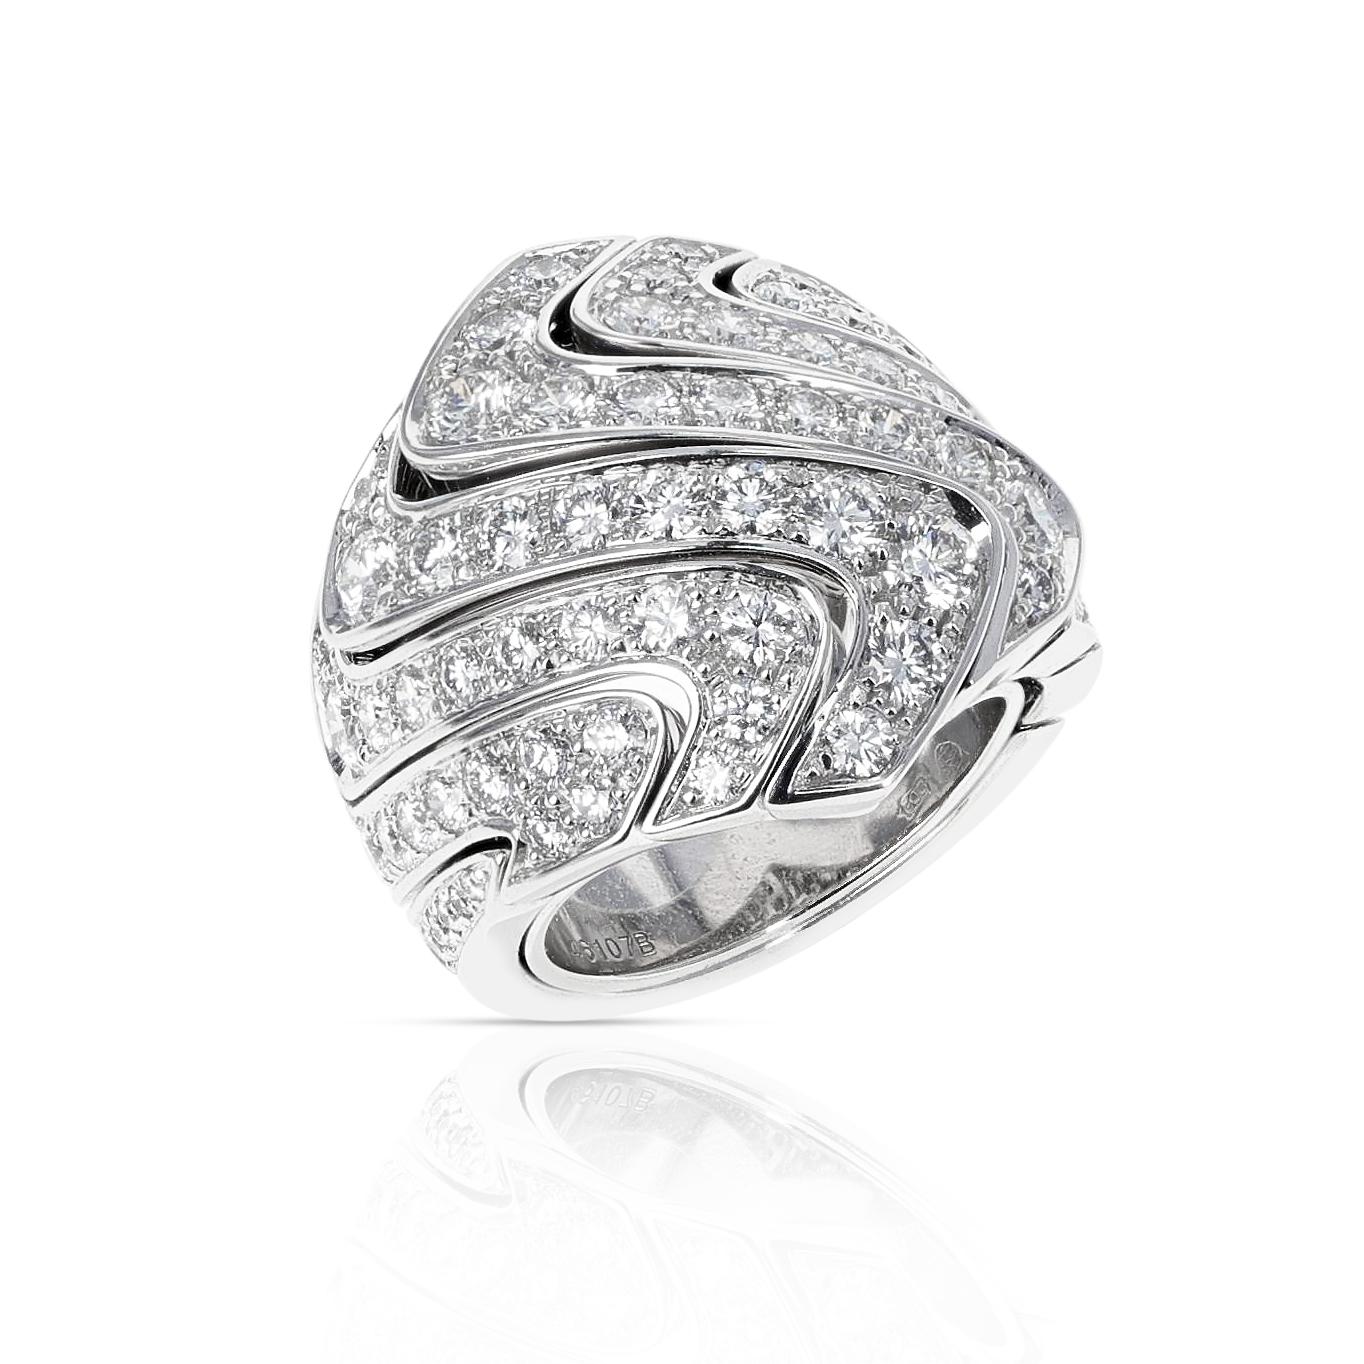 A Cartier 4 ct. Round Diamond Cocktail Ring made in 18K Gold. The total weight is 29.54 grams. The ring size is US 5.50.  

SKU: 509-AAEQJSJM